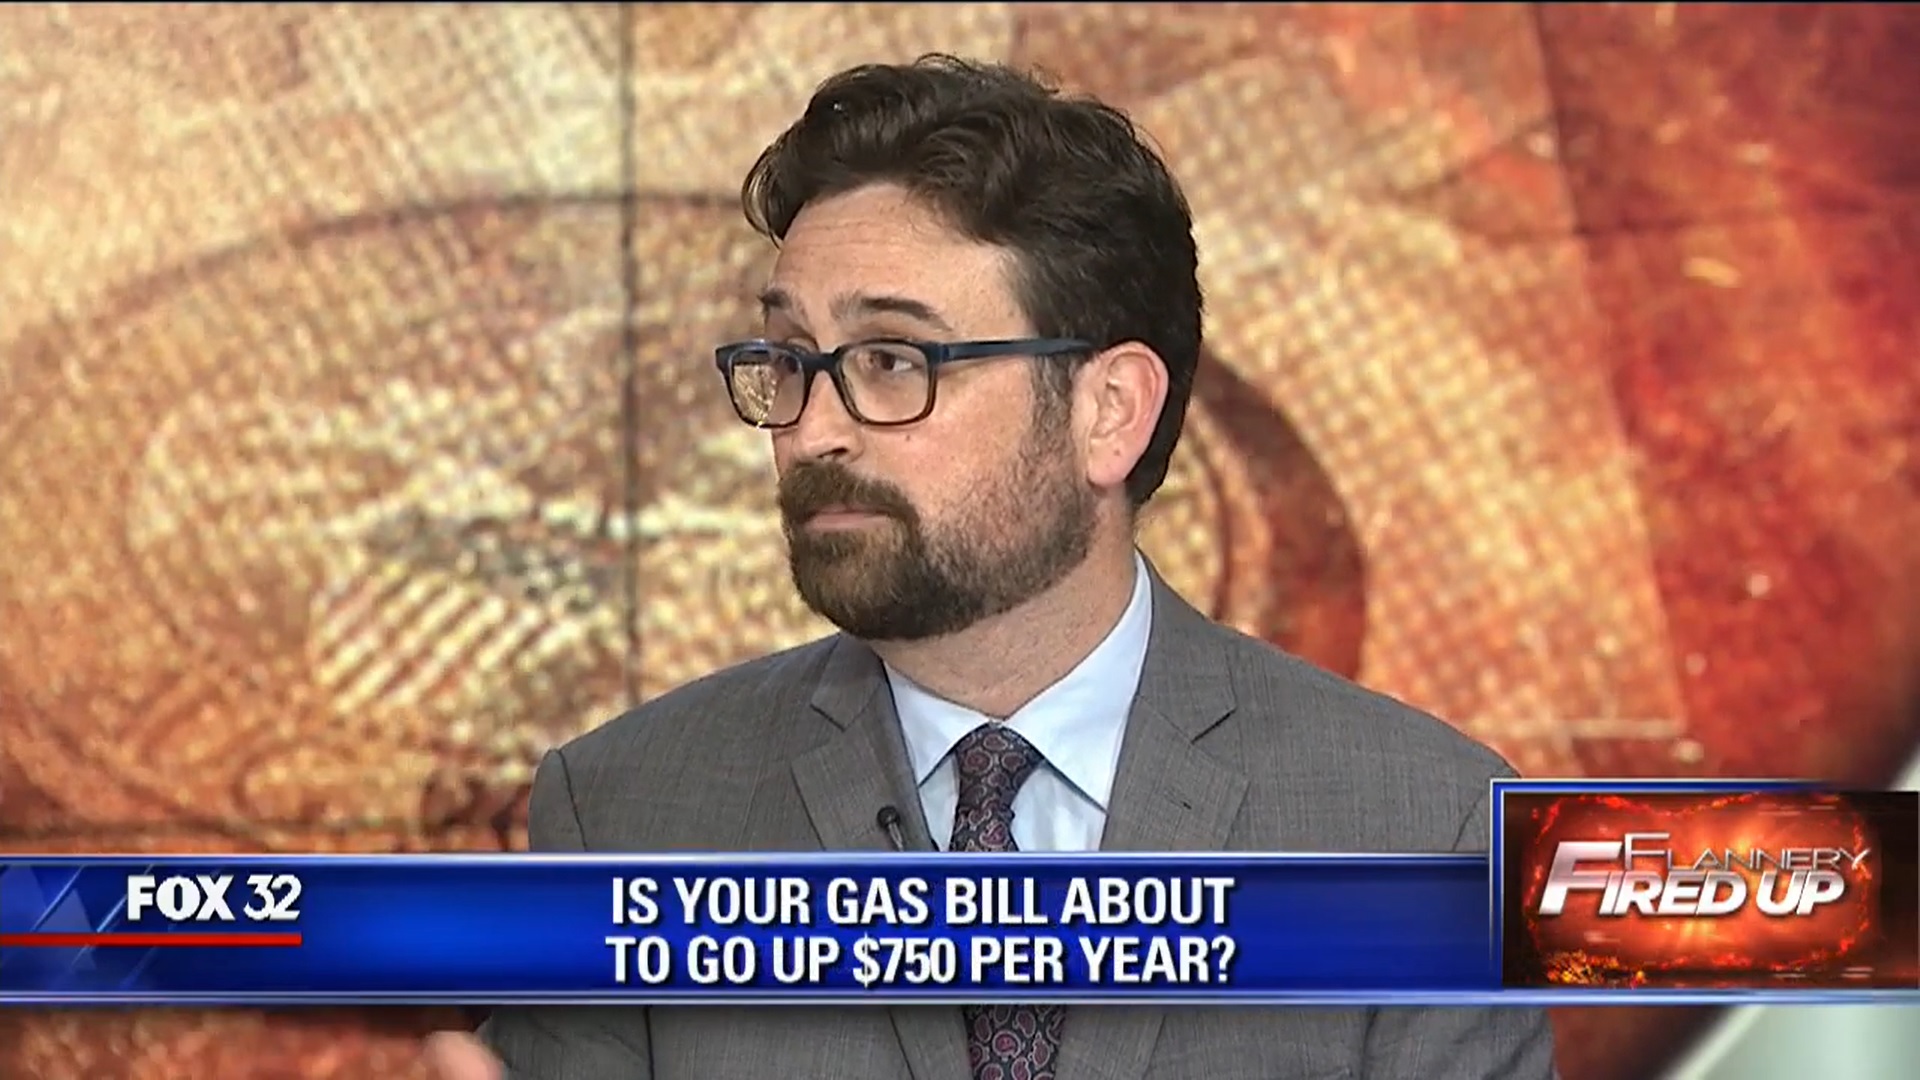 Illinois PIRG director Abe Scarr discusses the Peoples Gas pipe replacement program on Fox Chicago